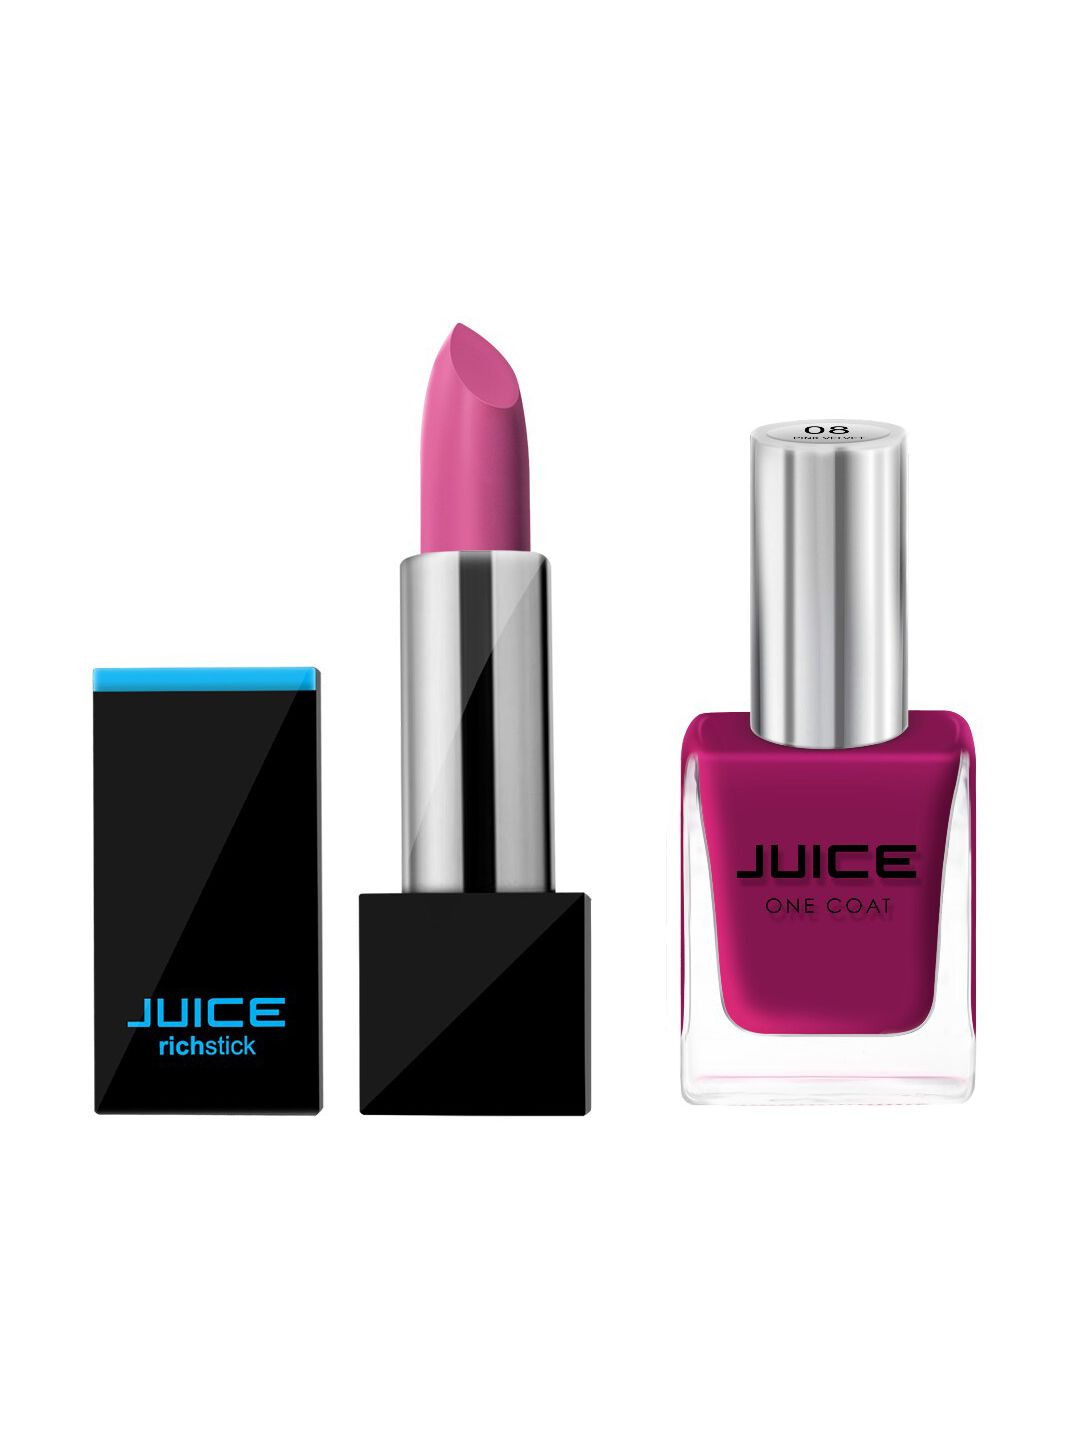 Juice Set of Richstick Lipstick - Angel Nude M90 & Nail Paint - Pink Velvet 08 Price in India